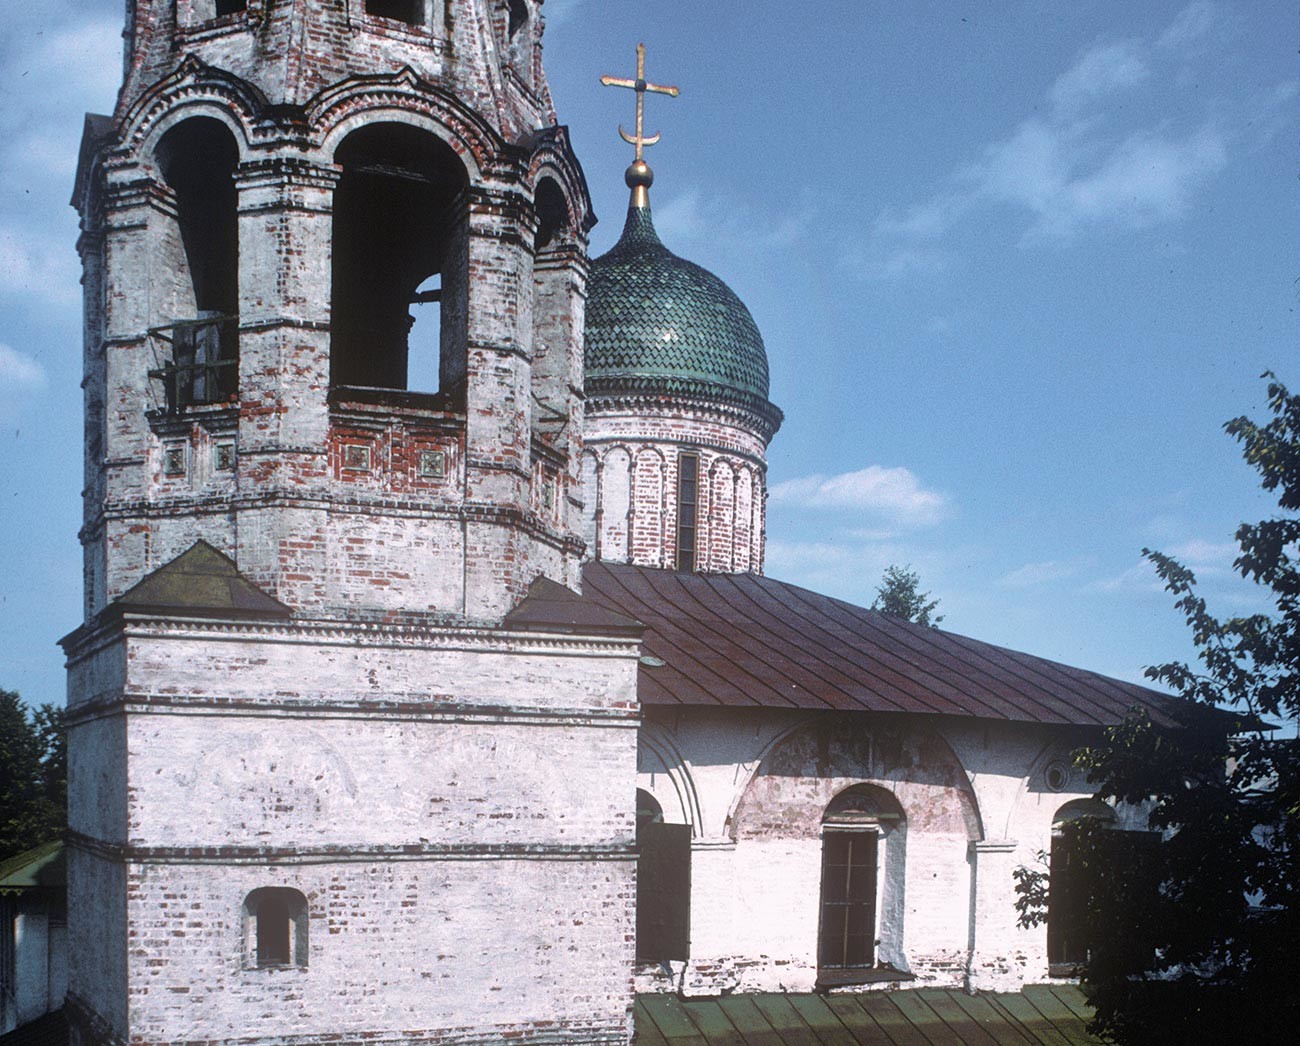 Yaroslavl. Church of St. Nicholas Nadein. West view, upper tier with bell tower. July 27, 1998